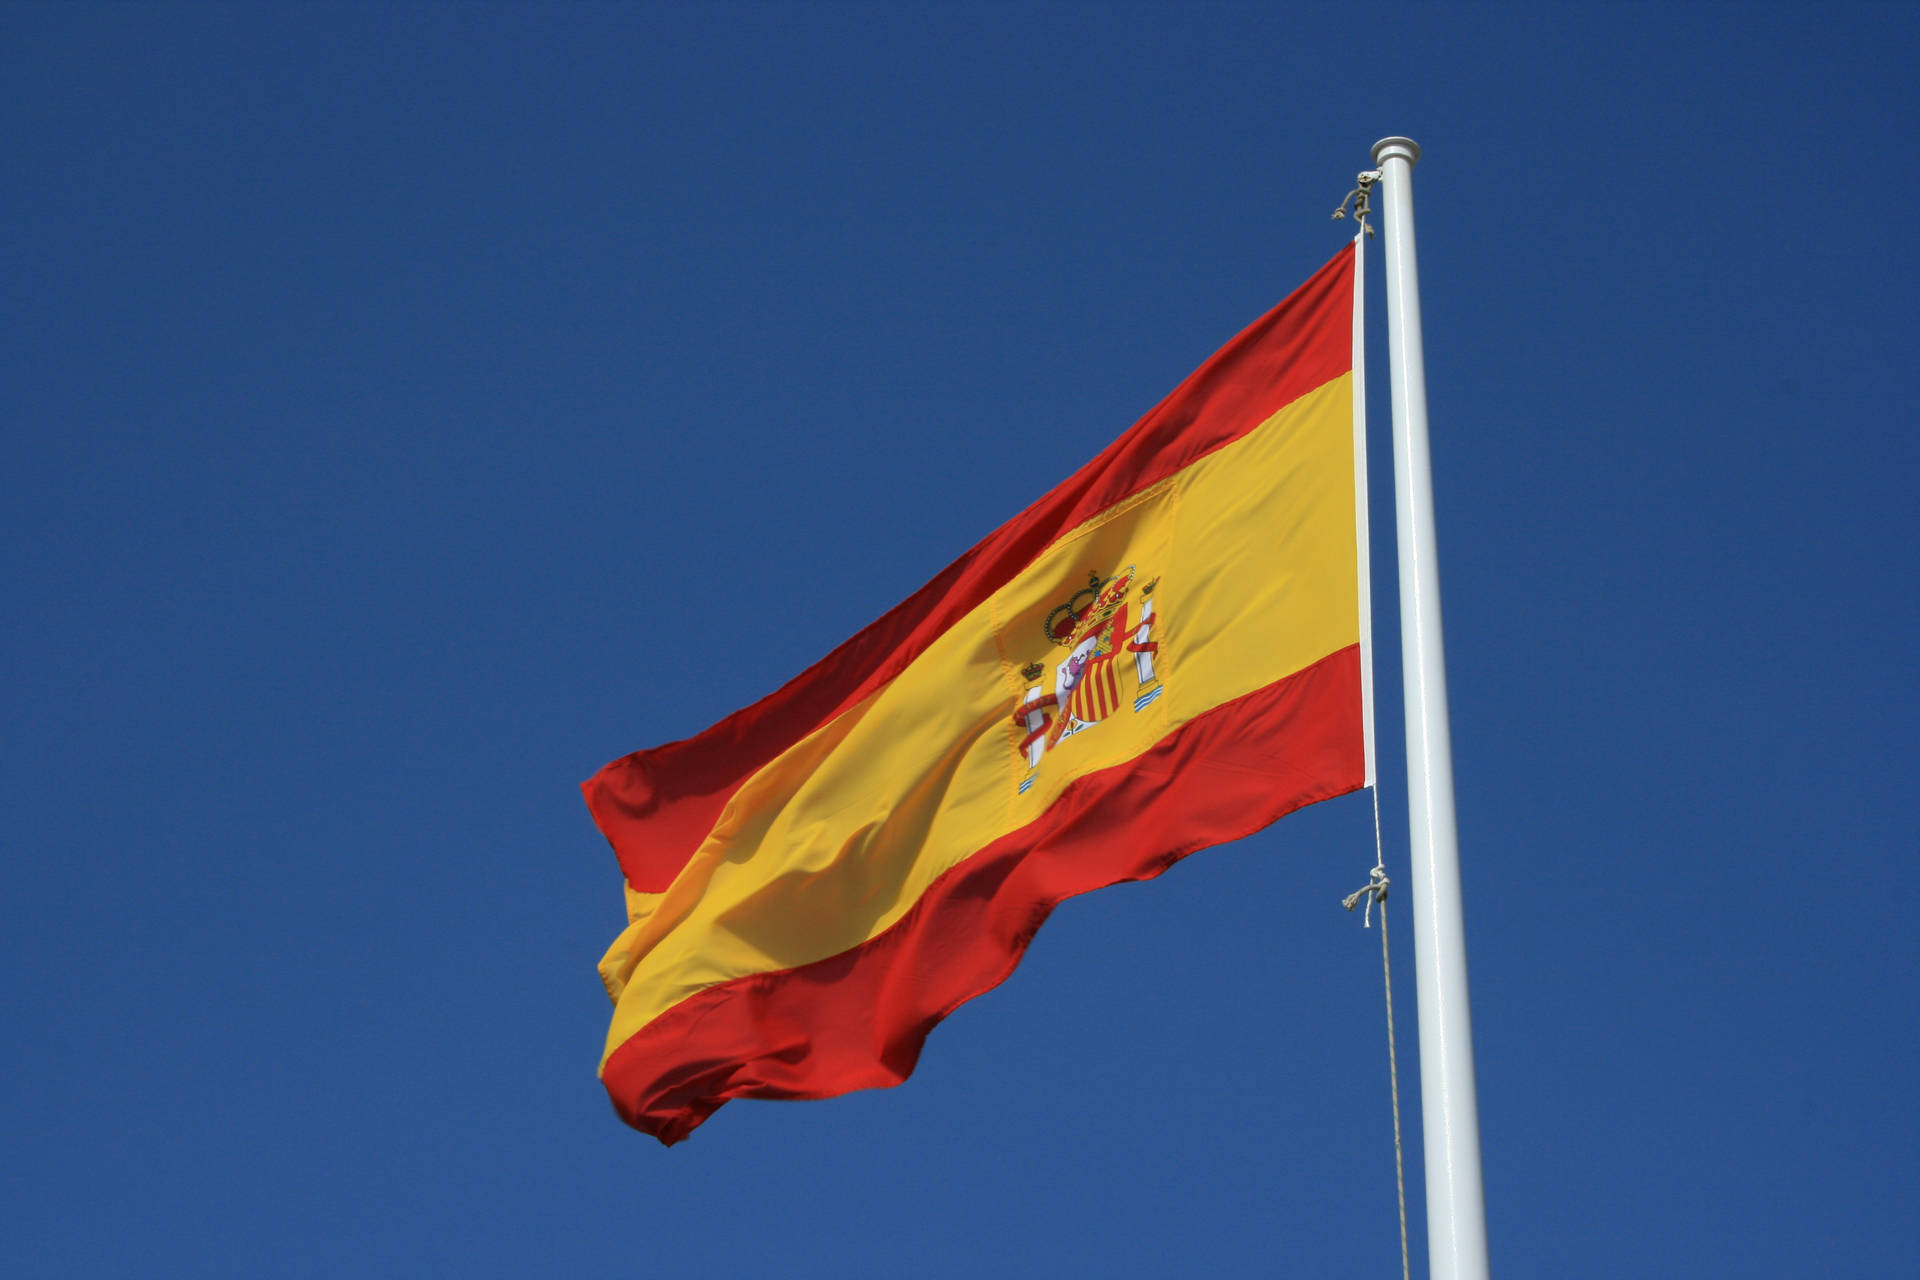 Spain's Pride - The Spanish Flag Majestically Flying Under Clear Blue Skies